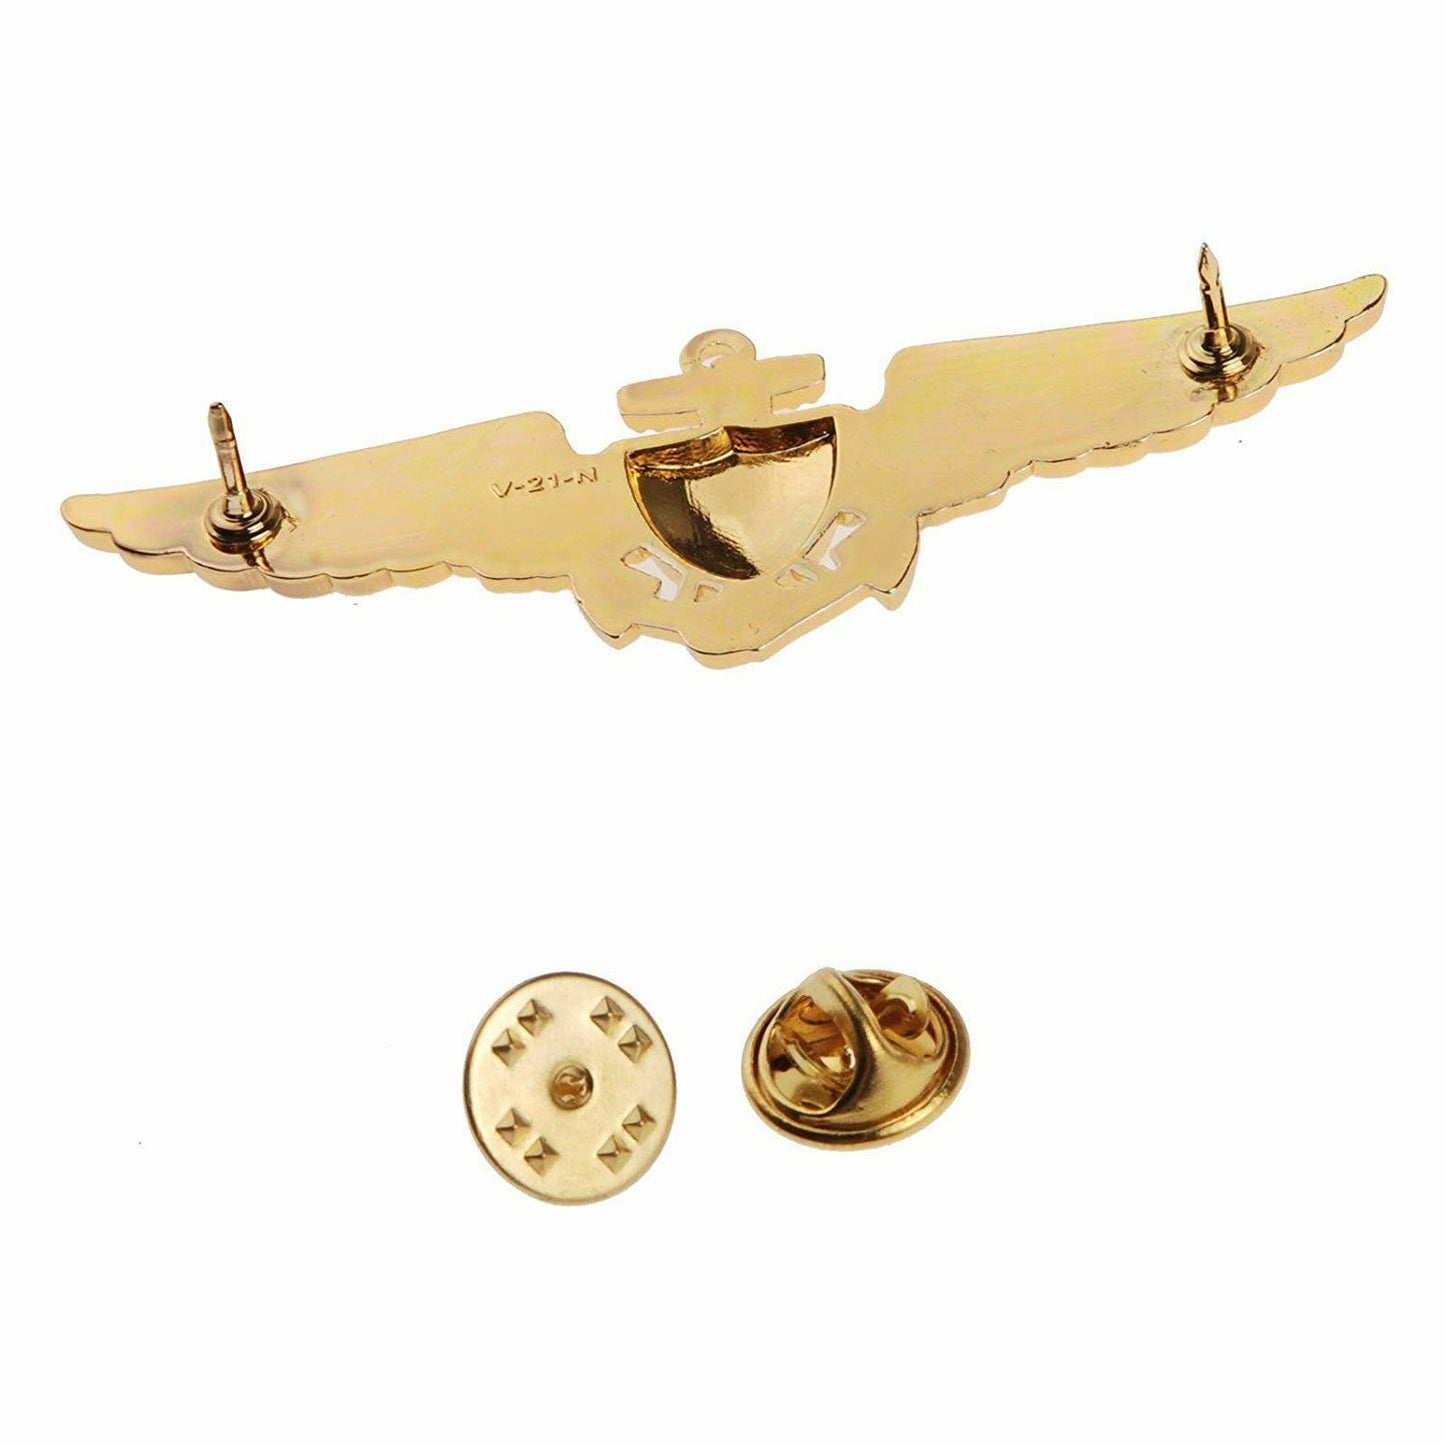 WWII US MILITARY NAVY MARINE CORPS AVIATOR WINGS PIN BADGE GOLD